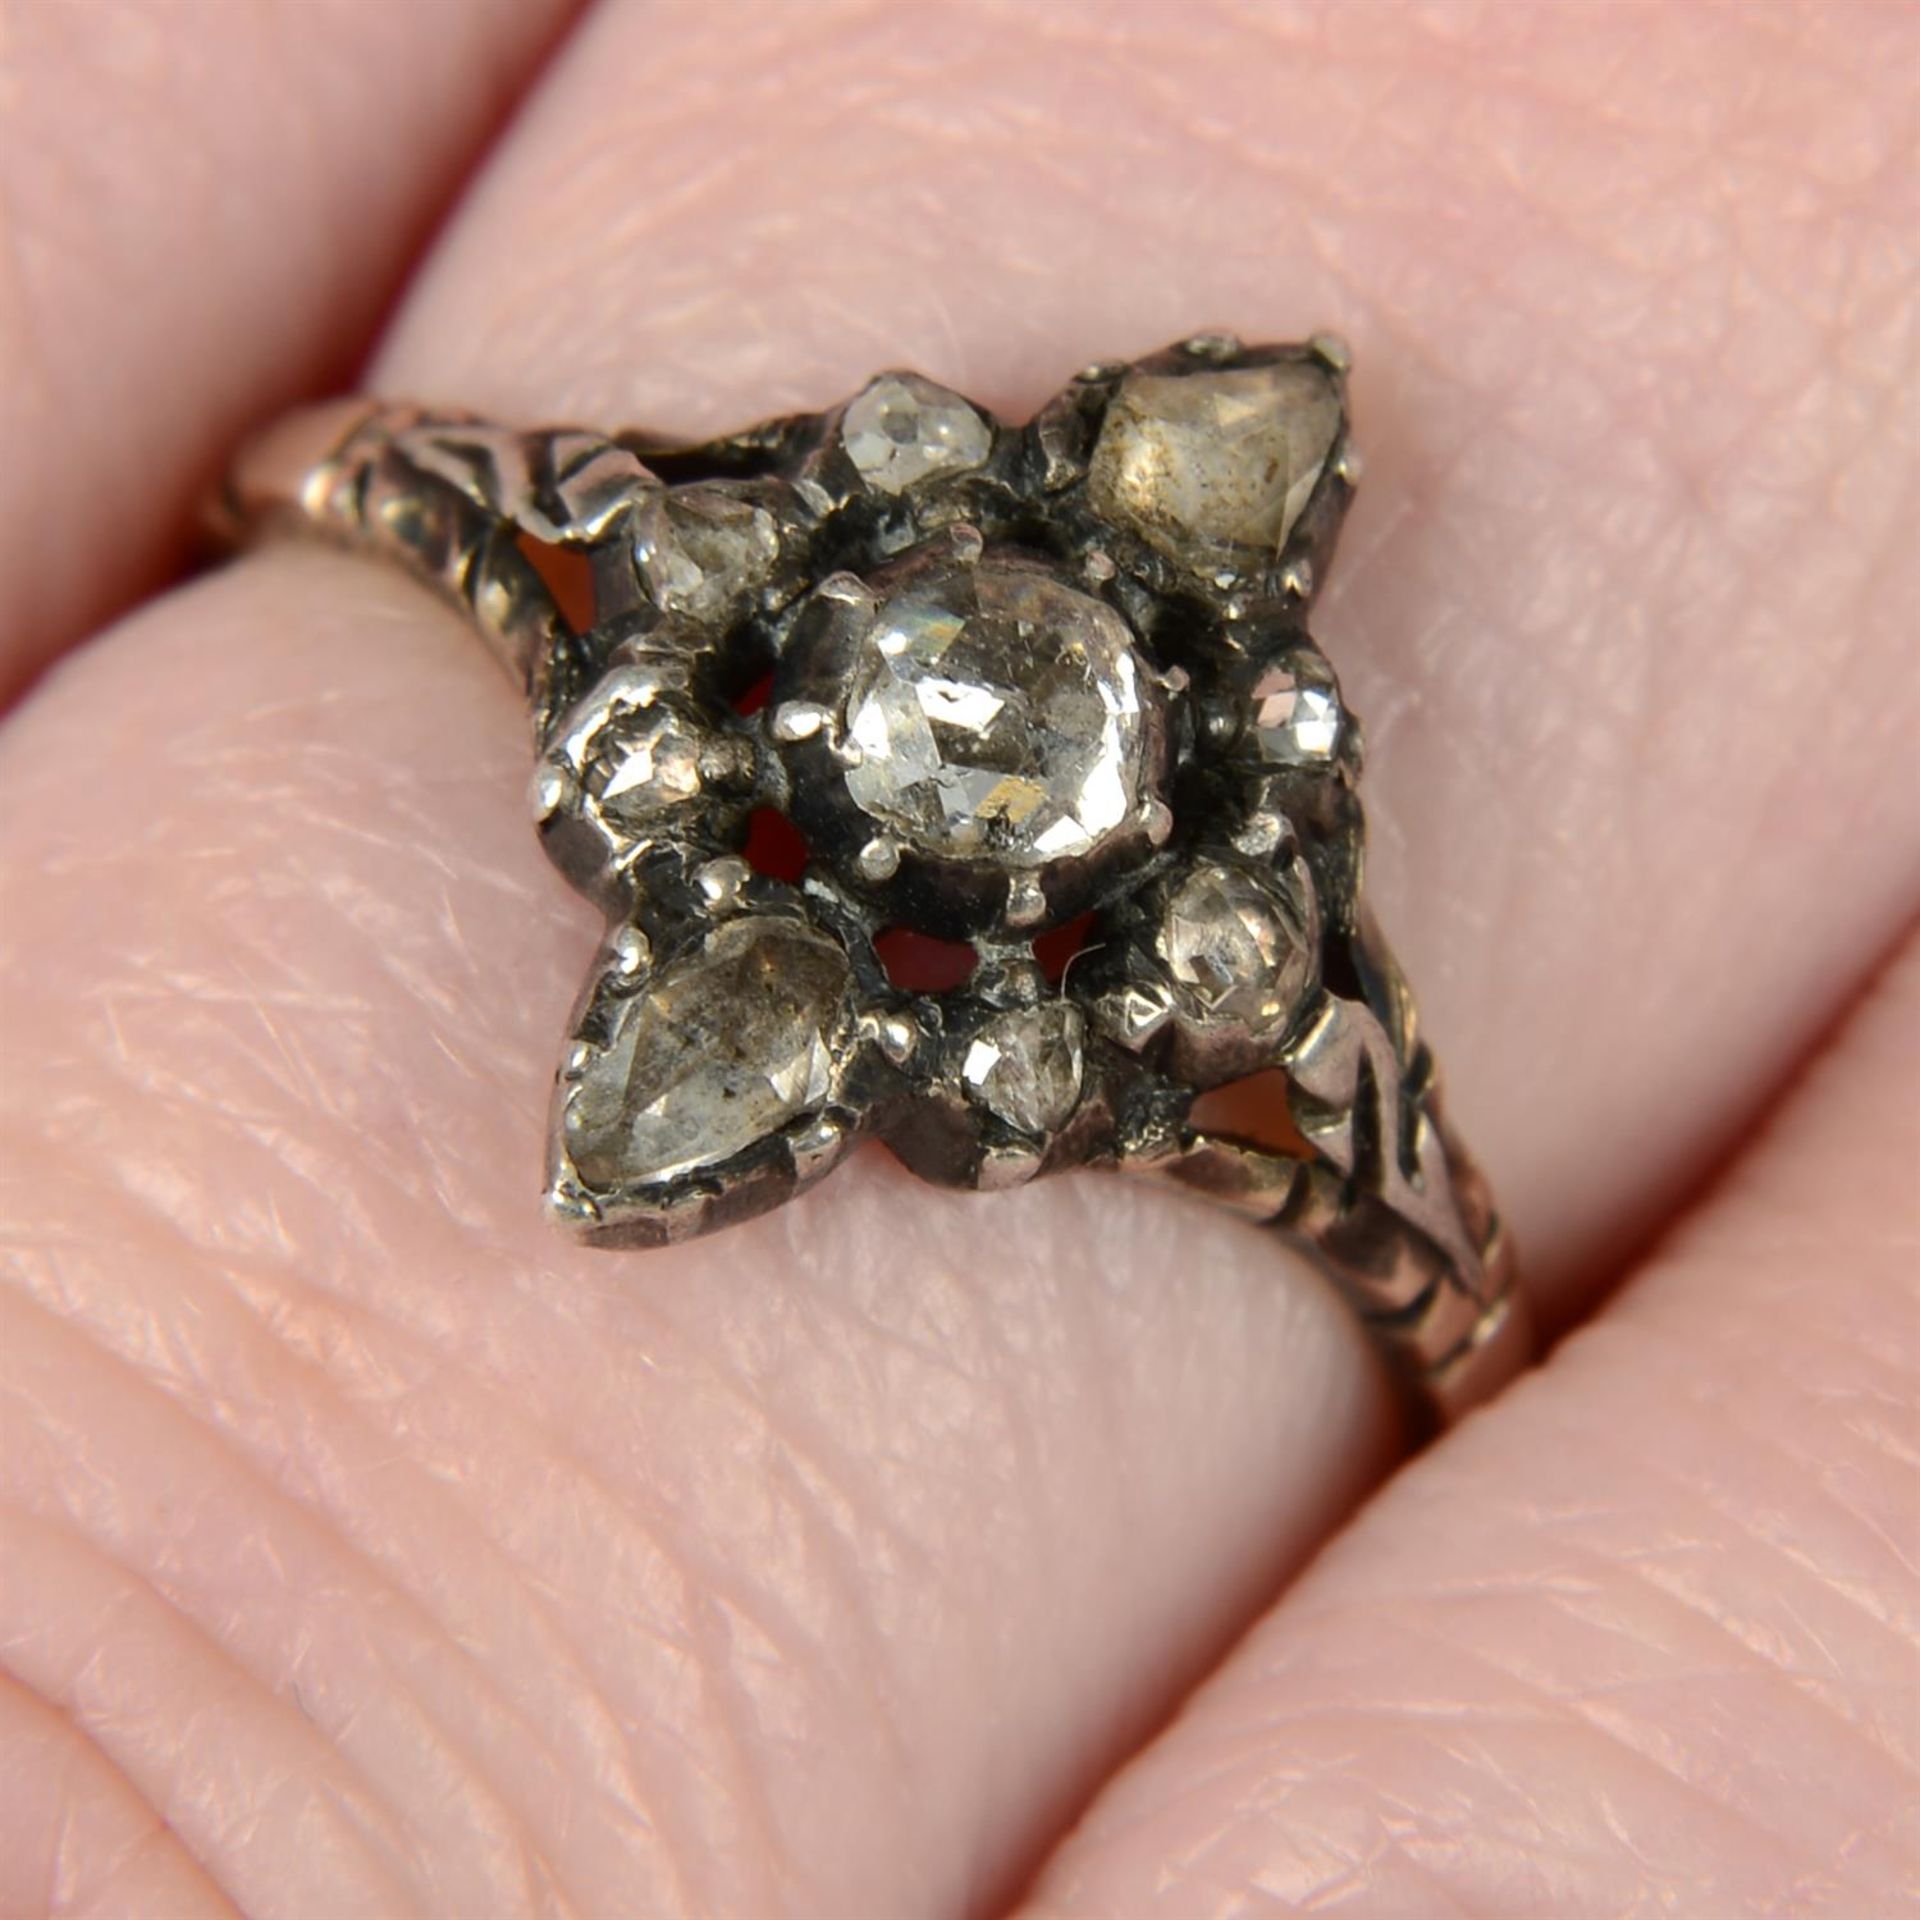 A 19th century silver and gold foil back rose-cut diamond cluster ring.